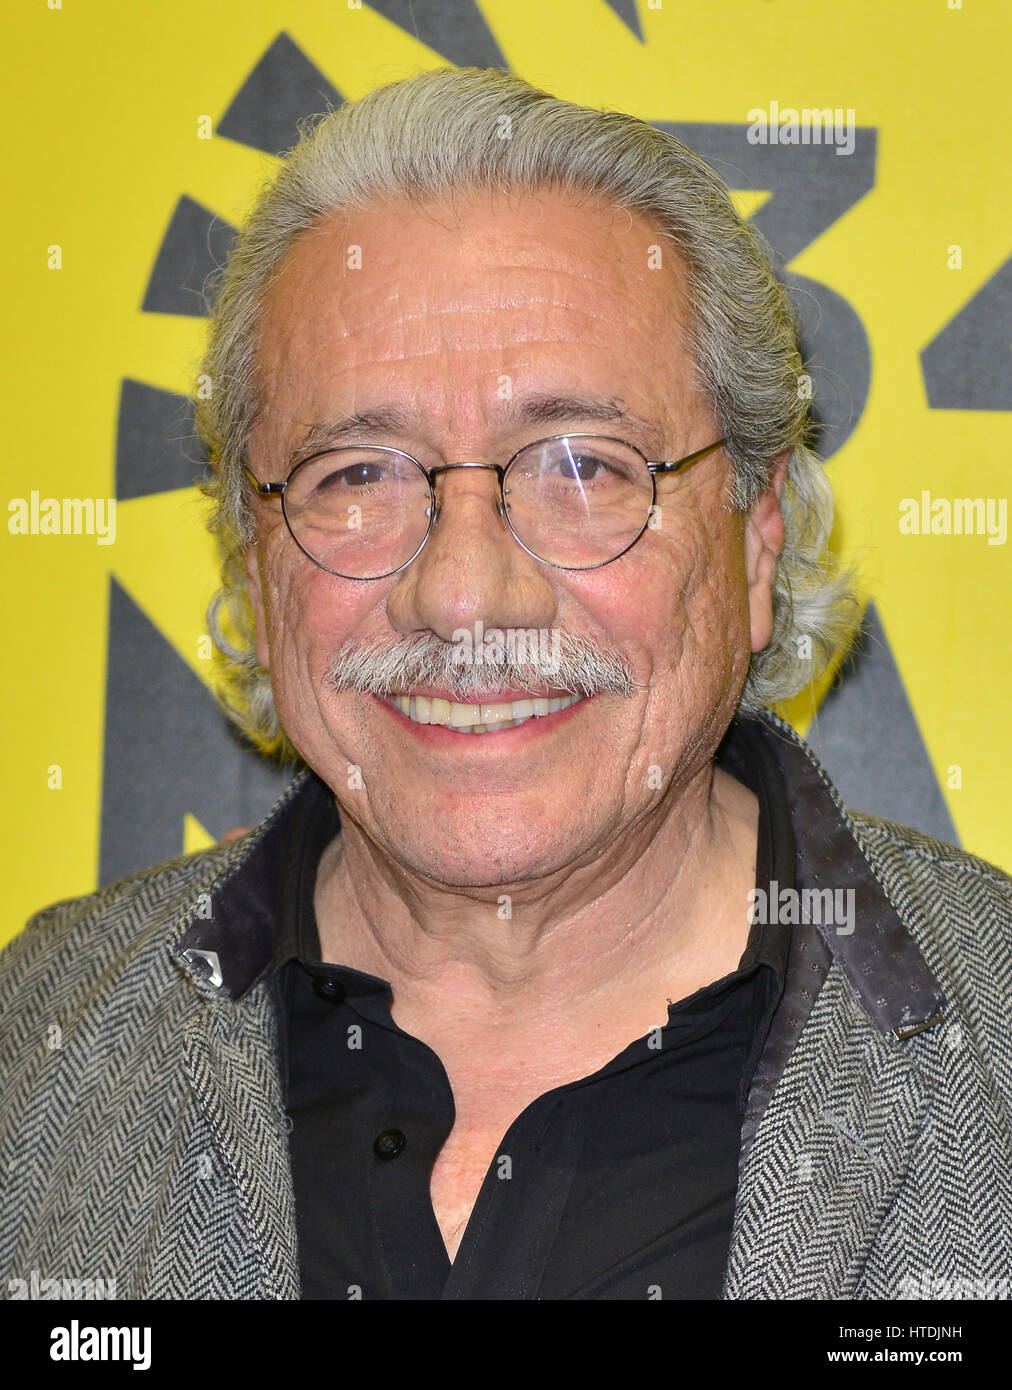 Miami Beach, FL, USA. 09th Mar, 2017. Actor/Producer/Director Edward James Olmos attend the Miami Dade College's: Miami Film Festival for 'Monday Nights At Seven' at O Cinema Miami Beach on March 9, 2017 in Miami, Florida. Credit: Mpi10/Media Punch/Alamy Live News Stock Photo